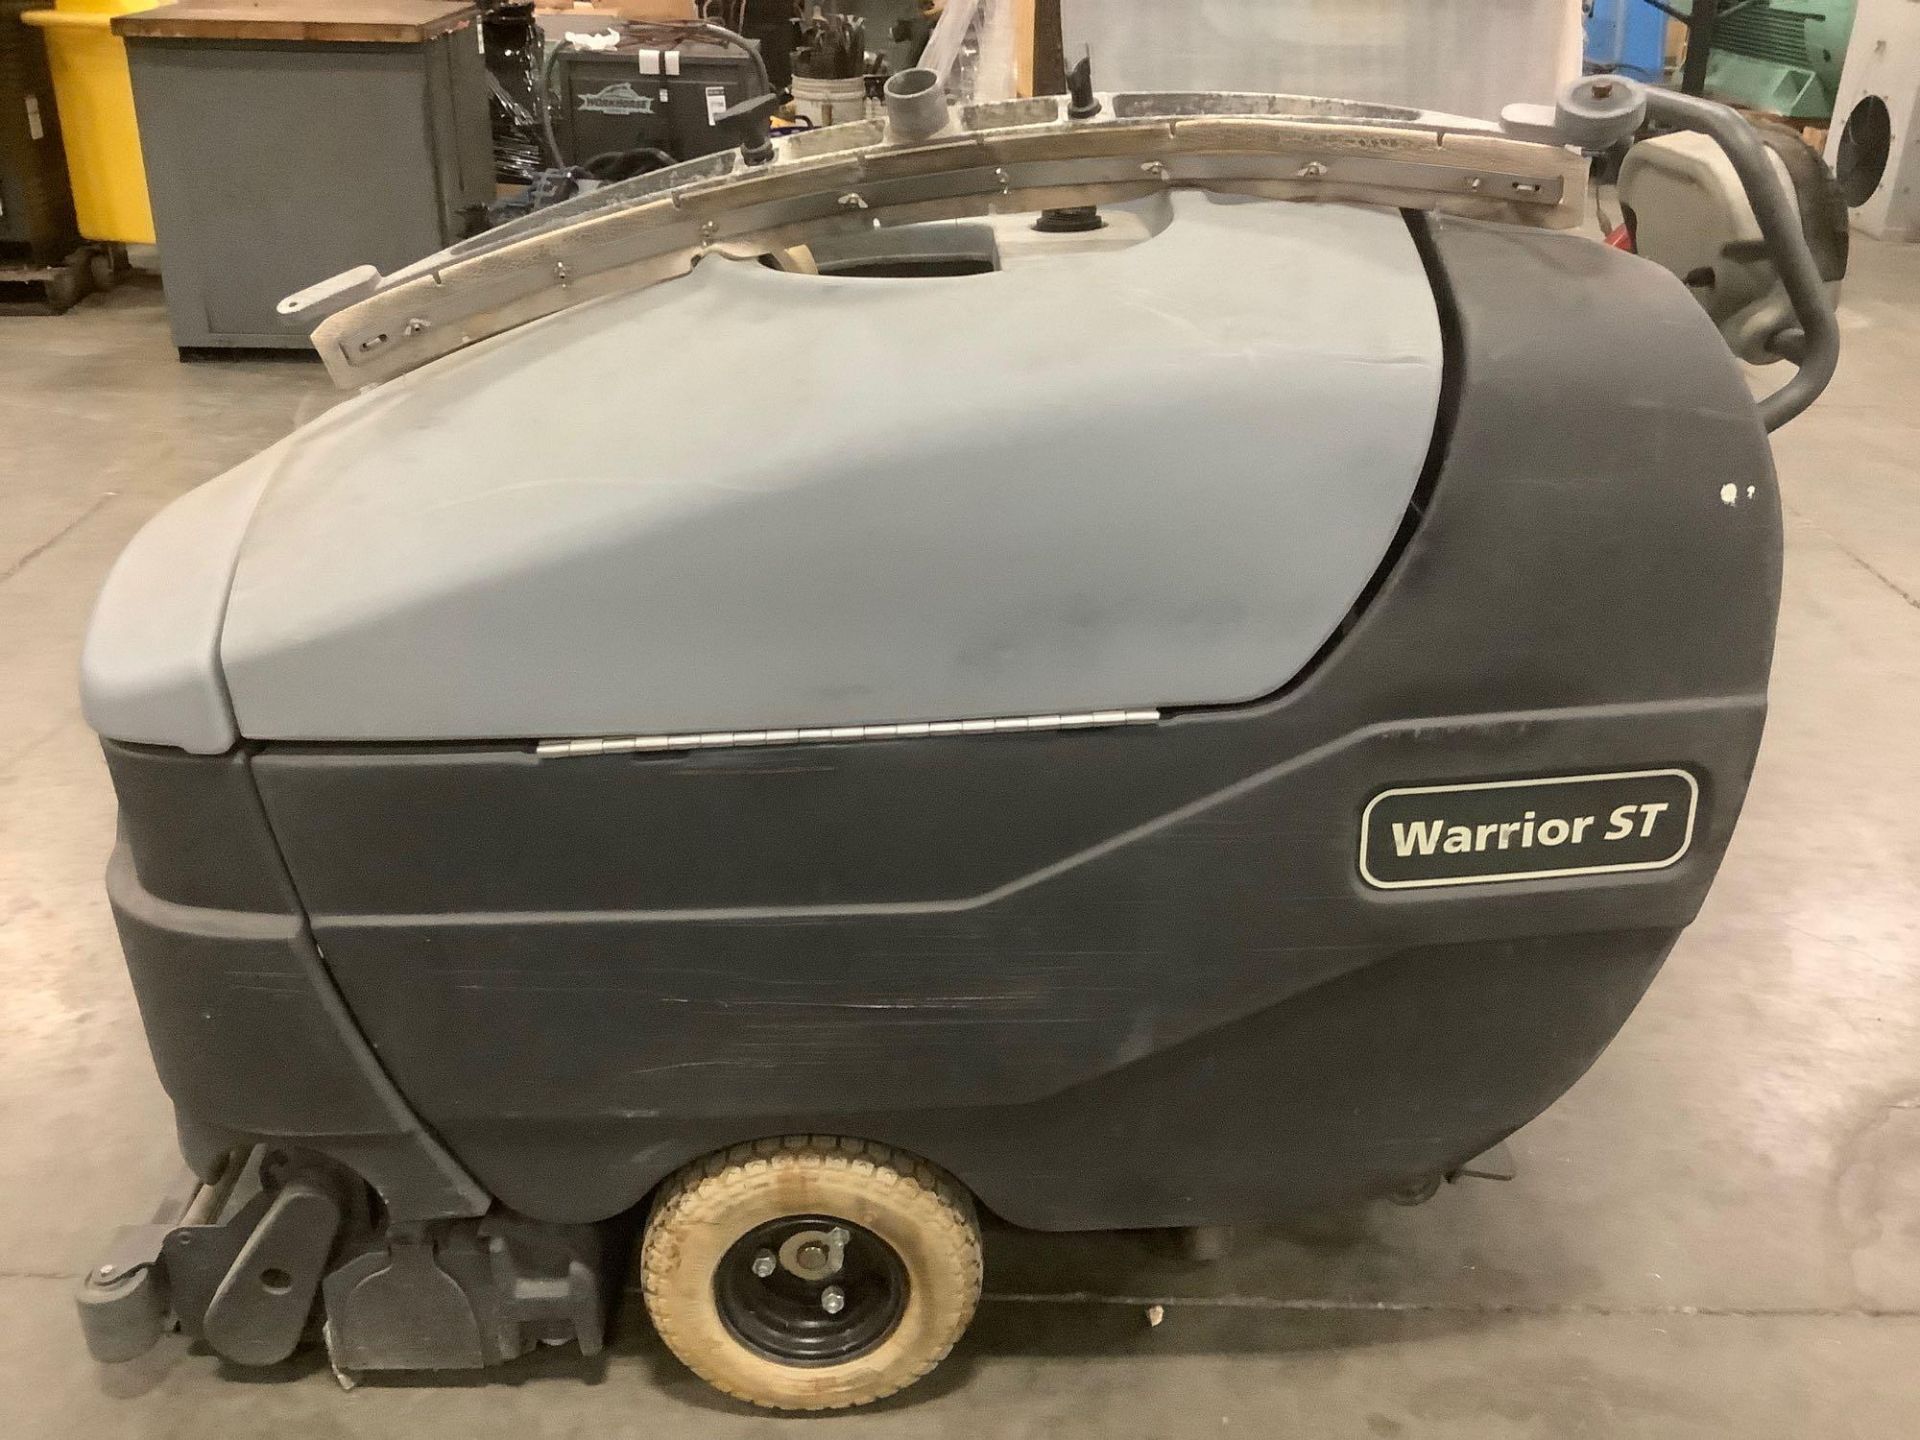 NILFISK ADVANCE FLOOR CLEANING MACHINE MODEL WARRIOR 286-C, ELECTRIC, APPROX 36VOLTS, DEAD BATTERY C - Image 5 of 11